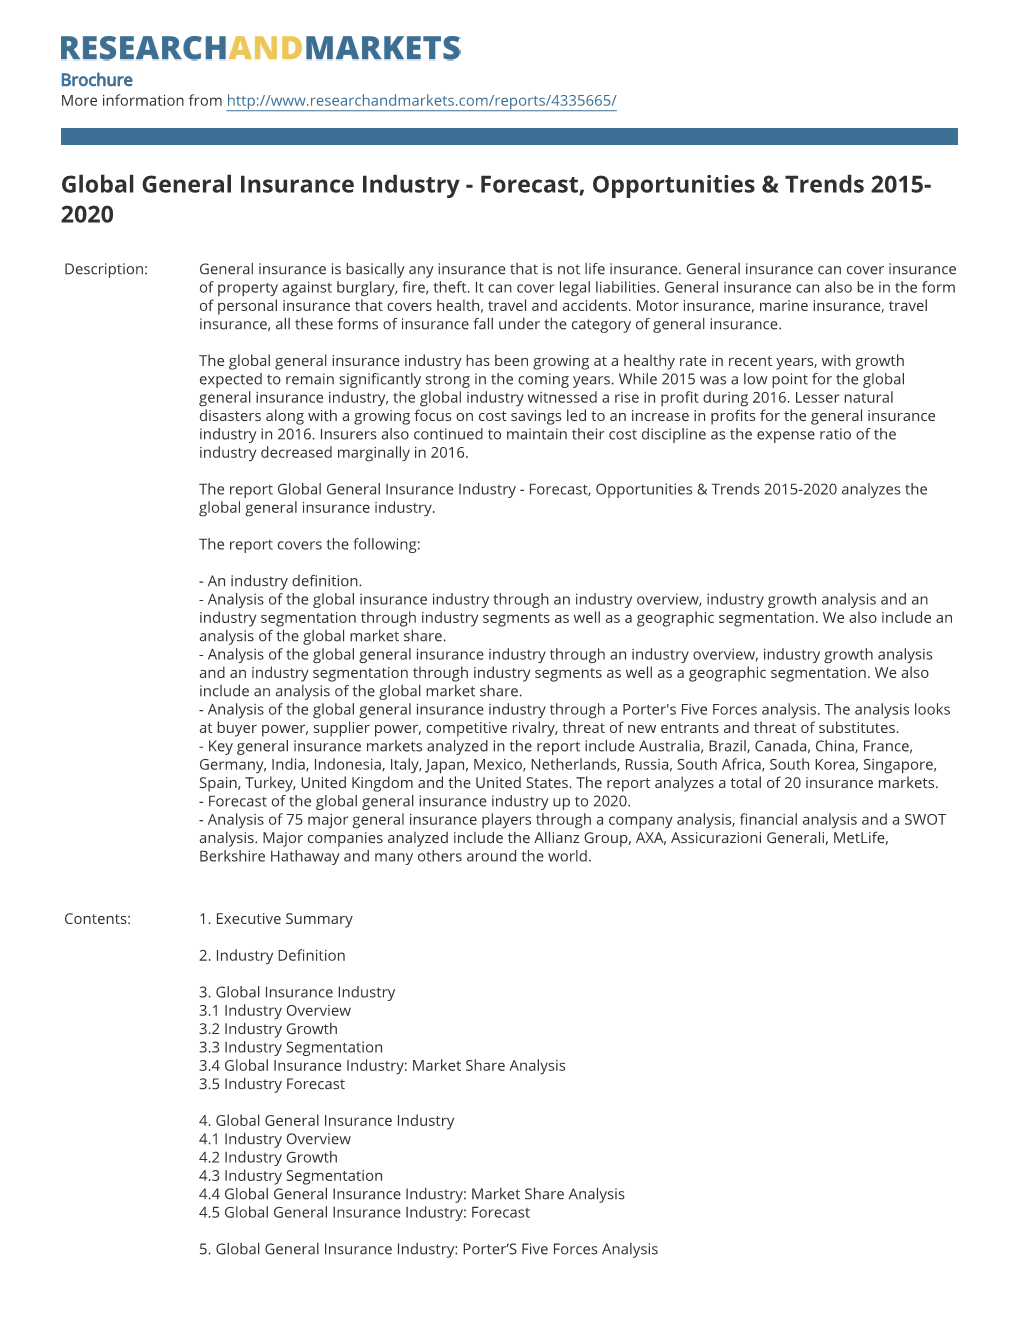 Global General Insurance Industry - Forecast, Opportunities & Trends 2015